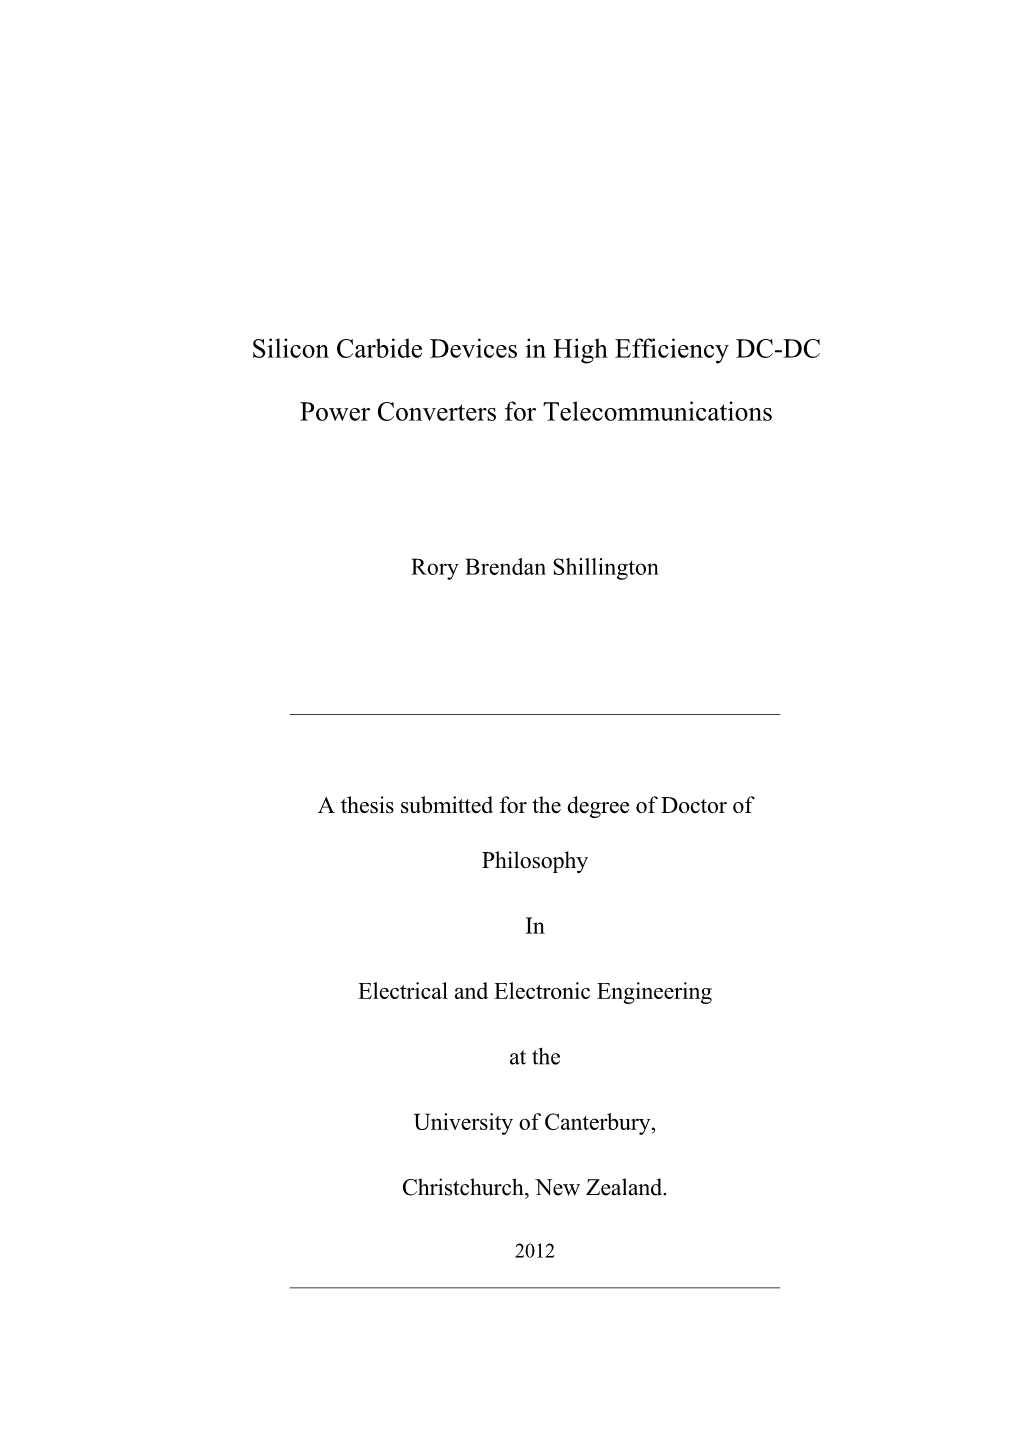 Silicon Carbide Devices in High Efficiency DC-DC Power